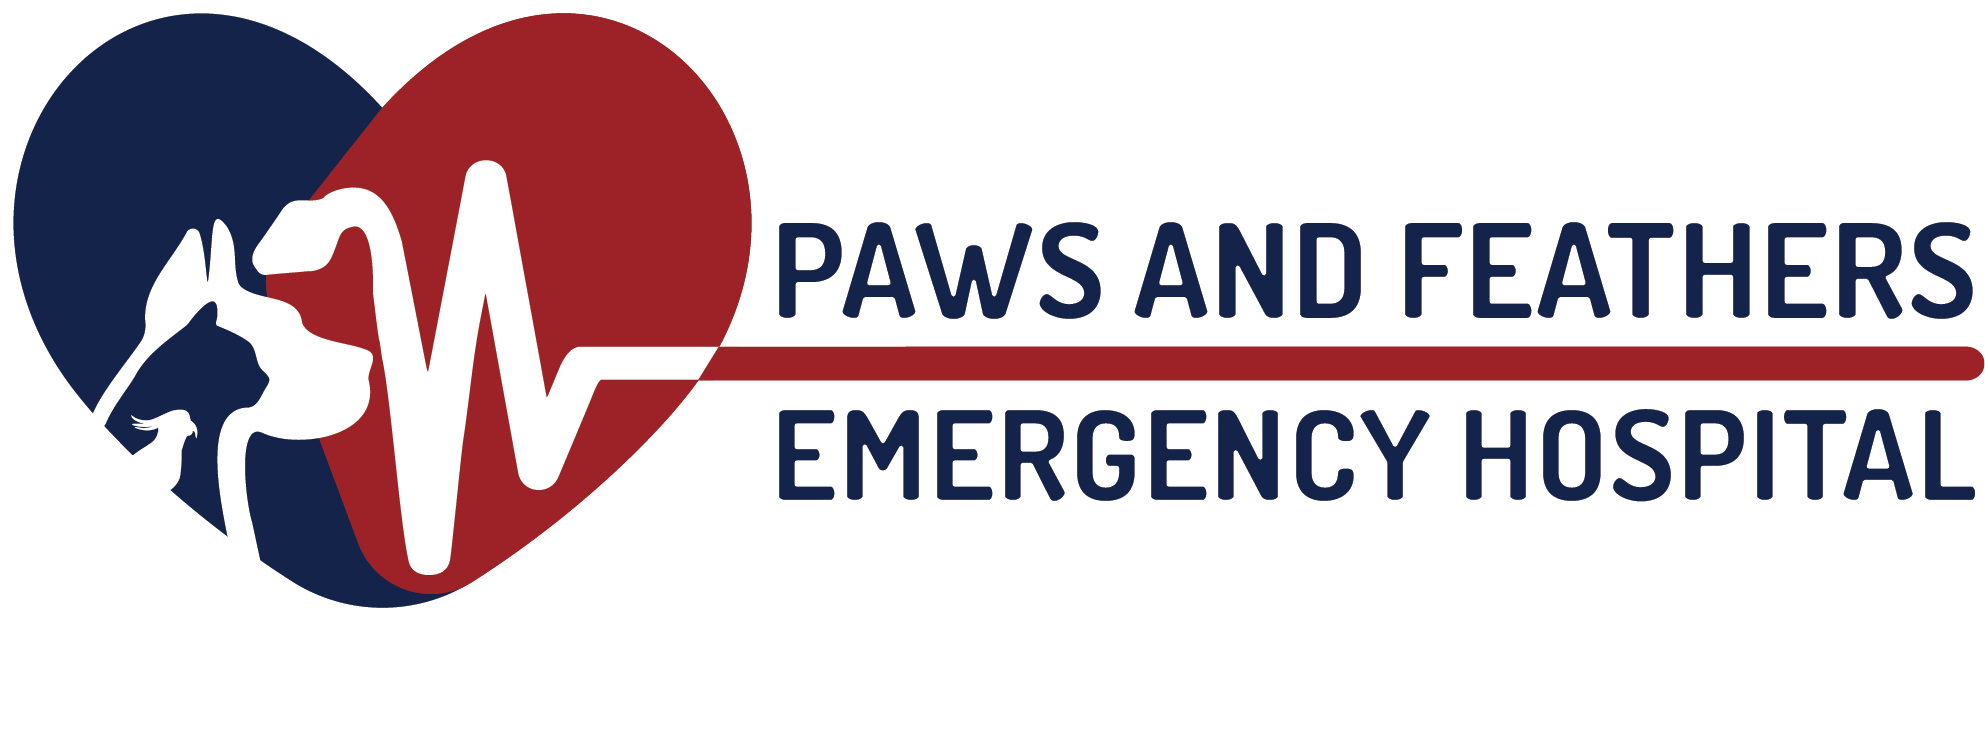 Paws and Feathers Emergency Hospital